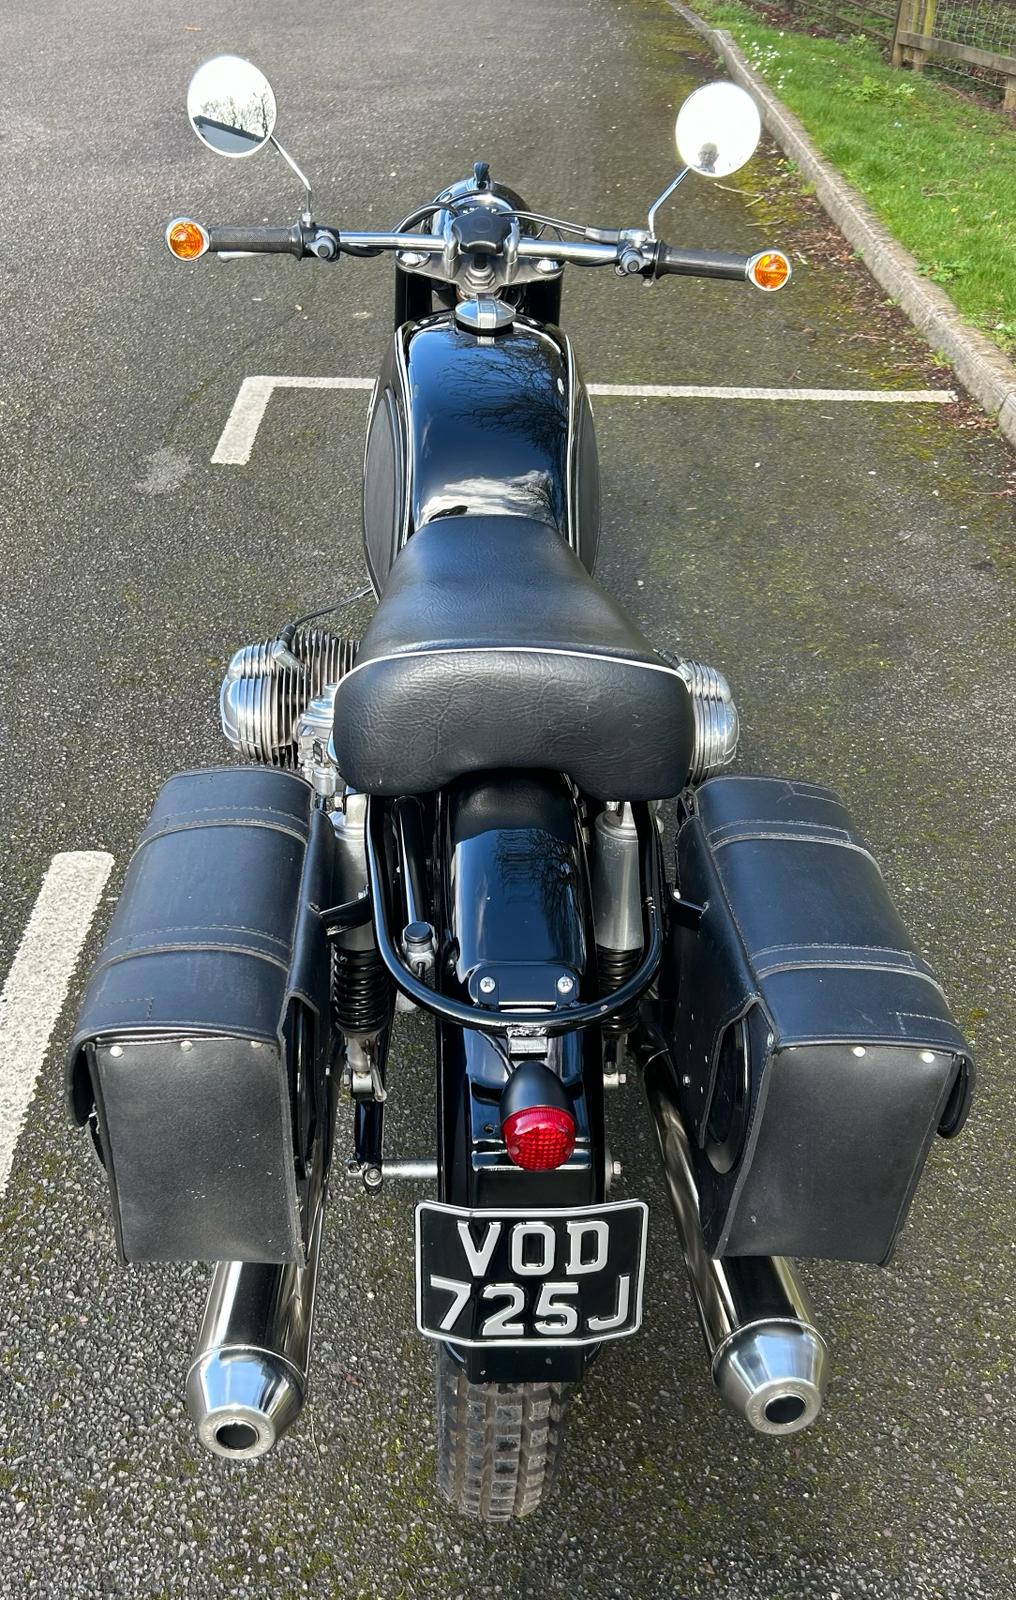 A BMW R75/5 MOTORCYCLE .1971. 72452 MILES. EXCELLENT WELL RESTORED CONDITION, V5, MOT AND TAX - Image 6 of 17